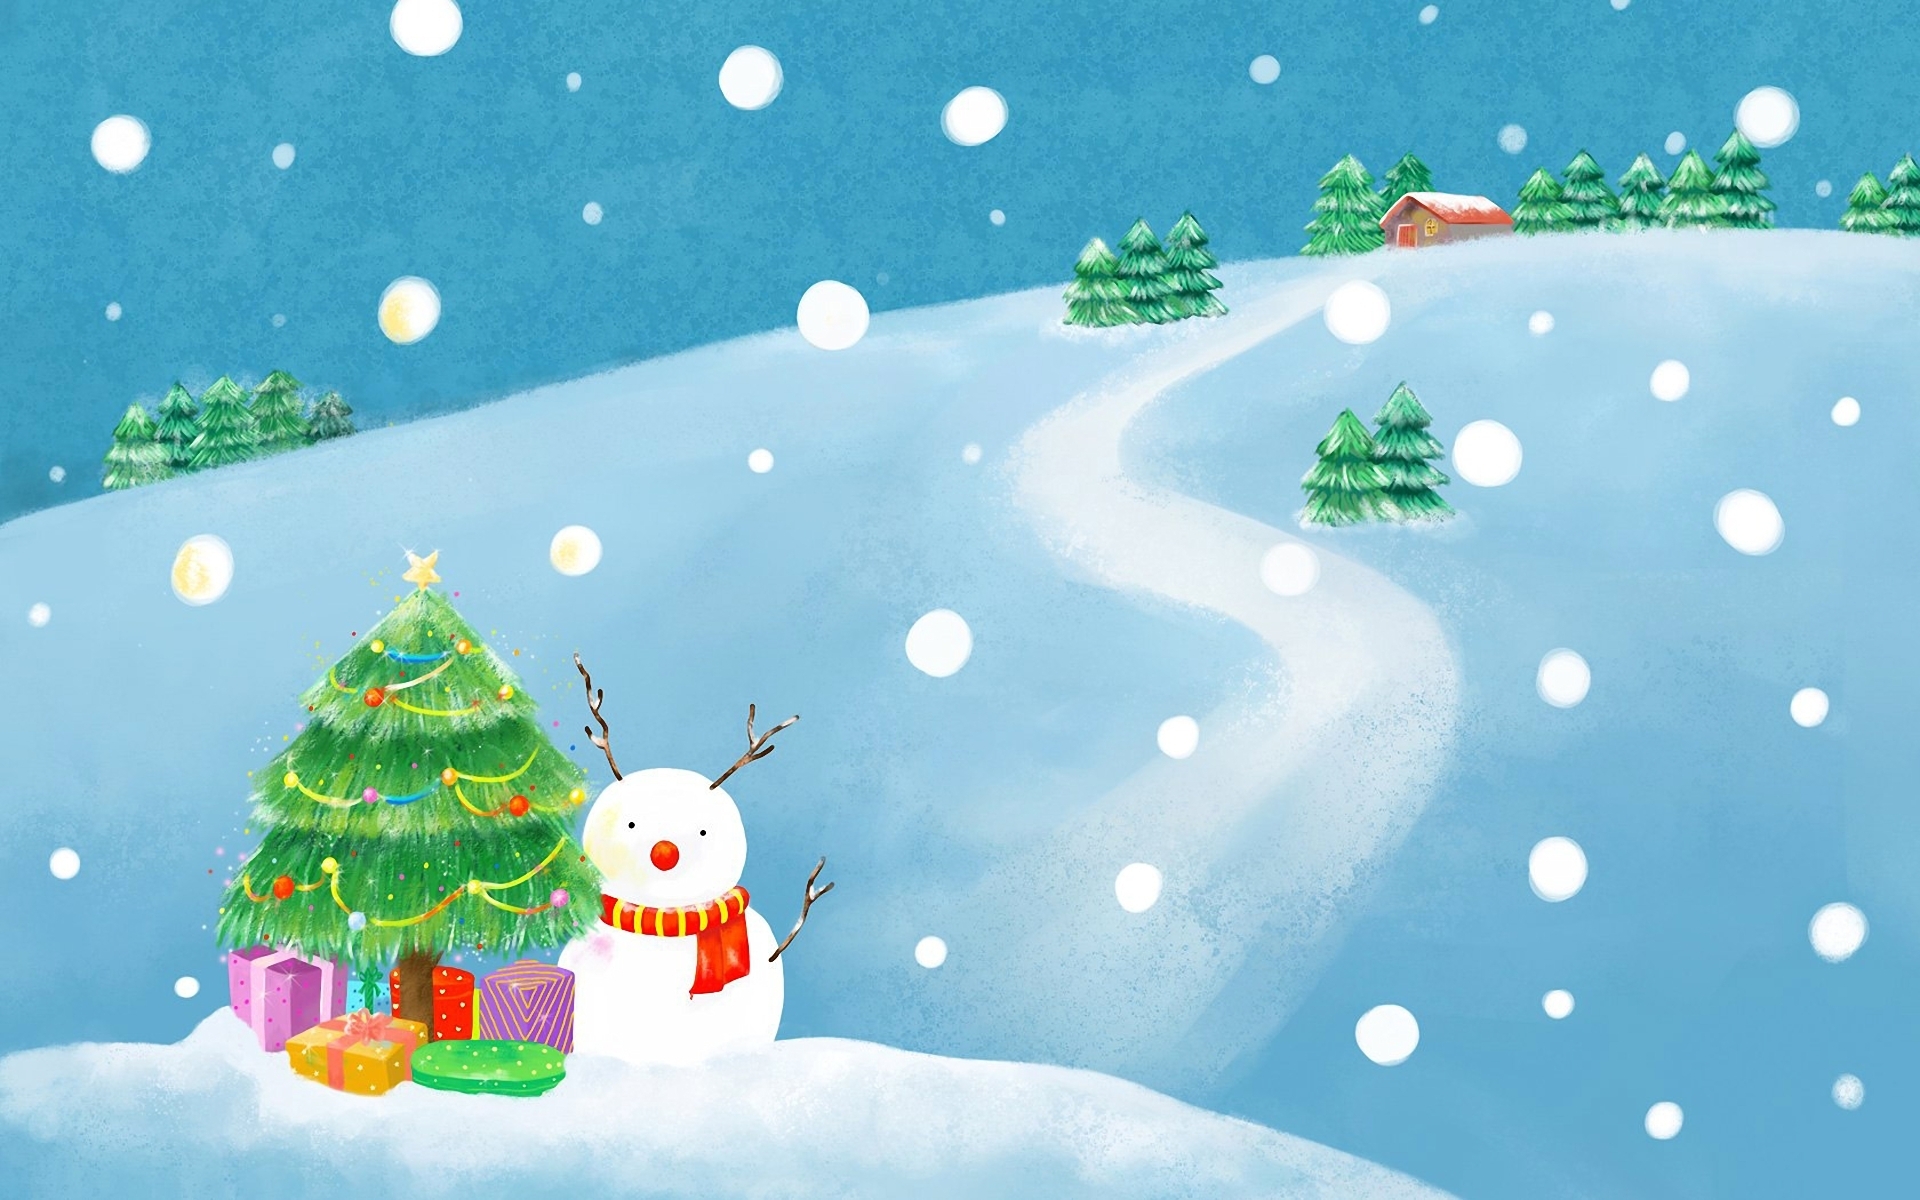 Wallpapers snow new year snowman on the desktop